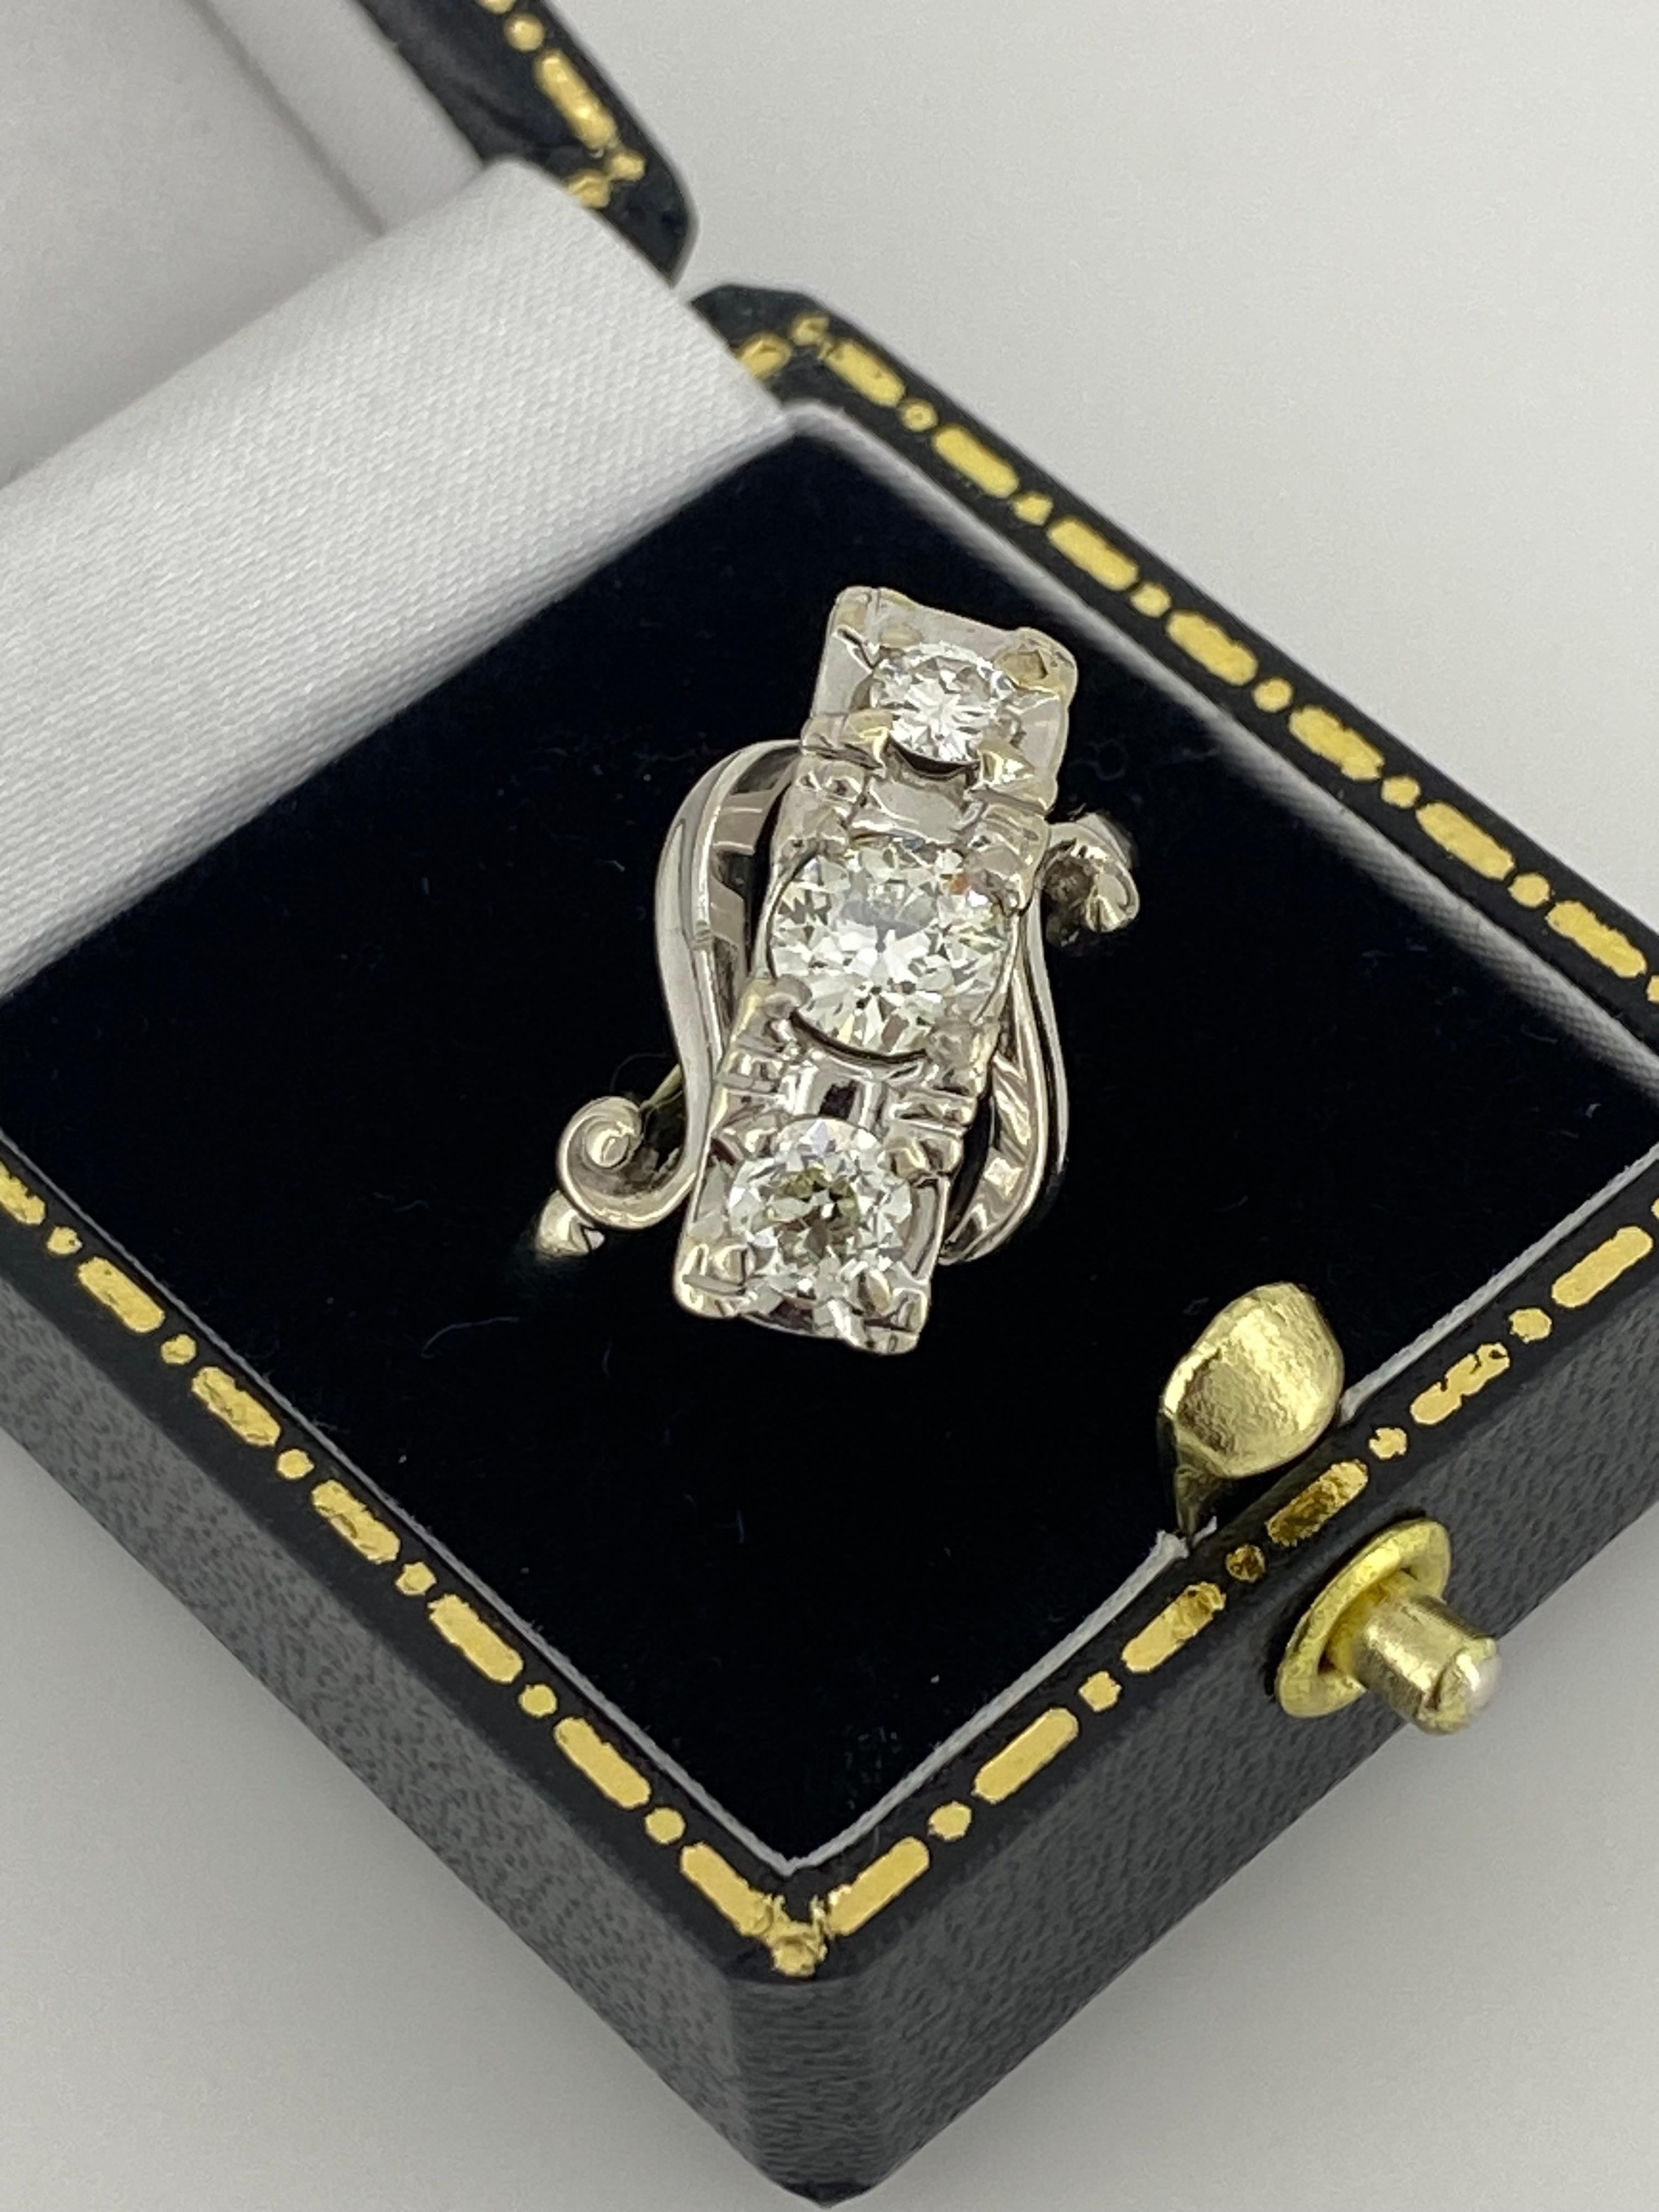 
This stunning piece of jewellery

is dating back to an Art-Deco period - circa 1930's, 

yet it's in beautiful condition & 

of rather unusual rarely seen design 

 

~~

 

Featuring 3 Natural Old-European Cut Diamonds, 

which are rare & sought